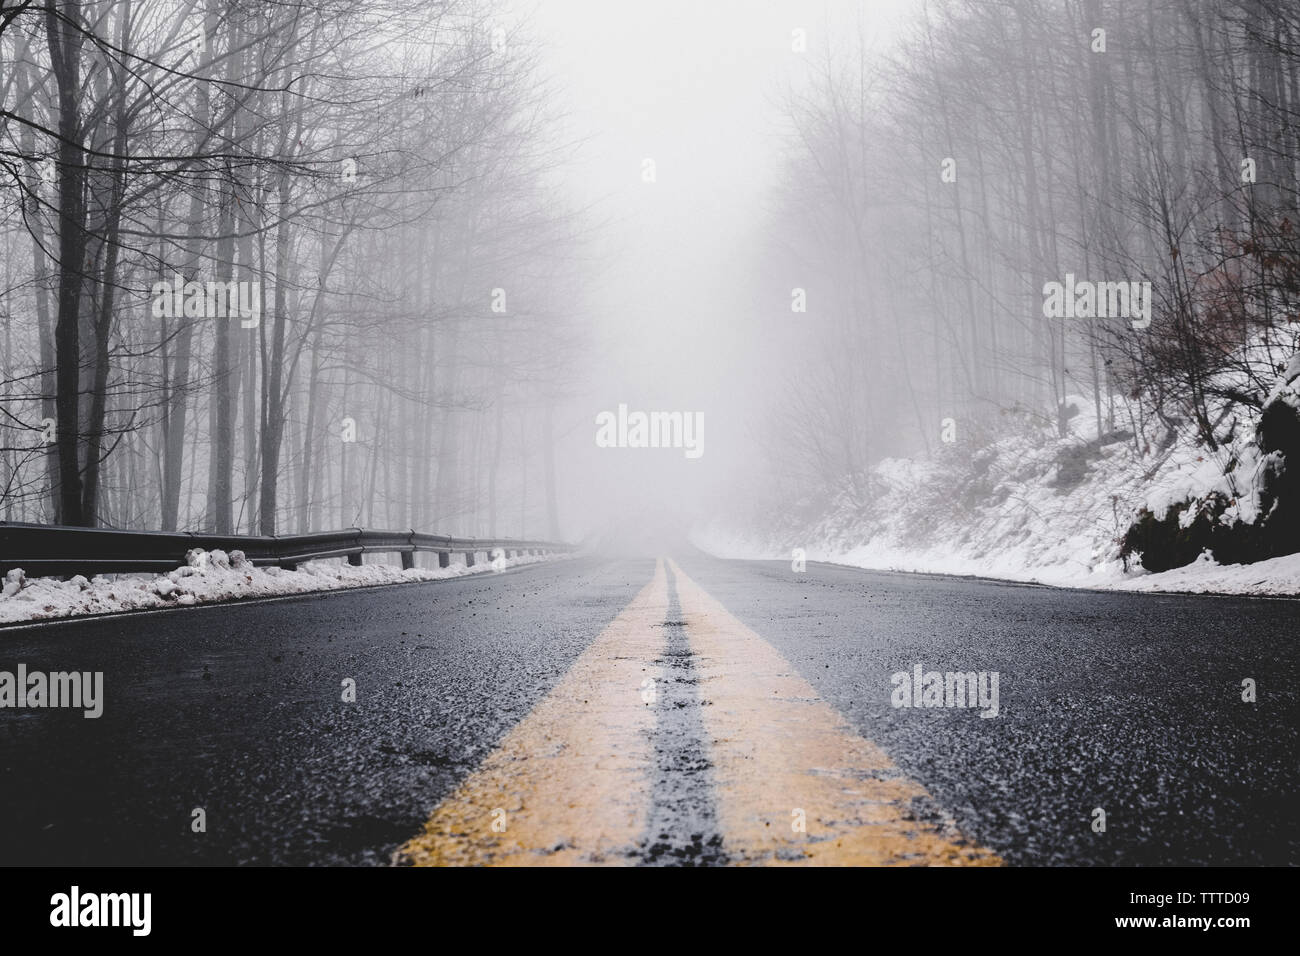 Empty wet country road amidst bare trees during foggy weather Stock Photo